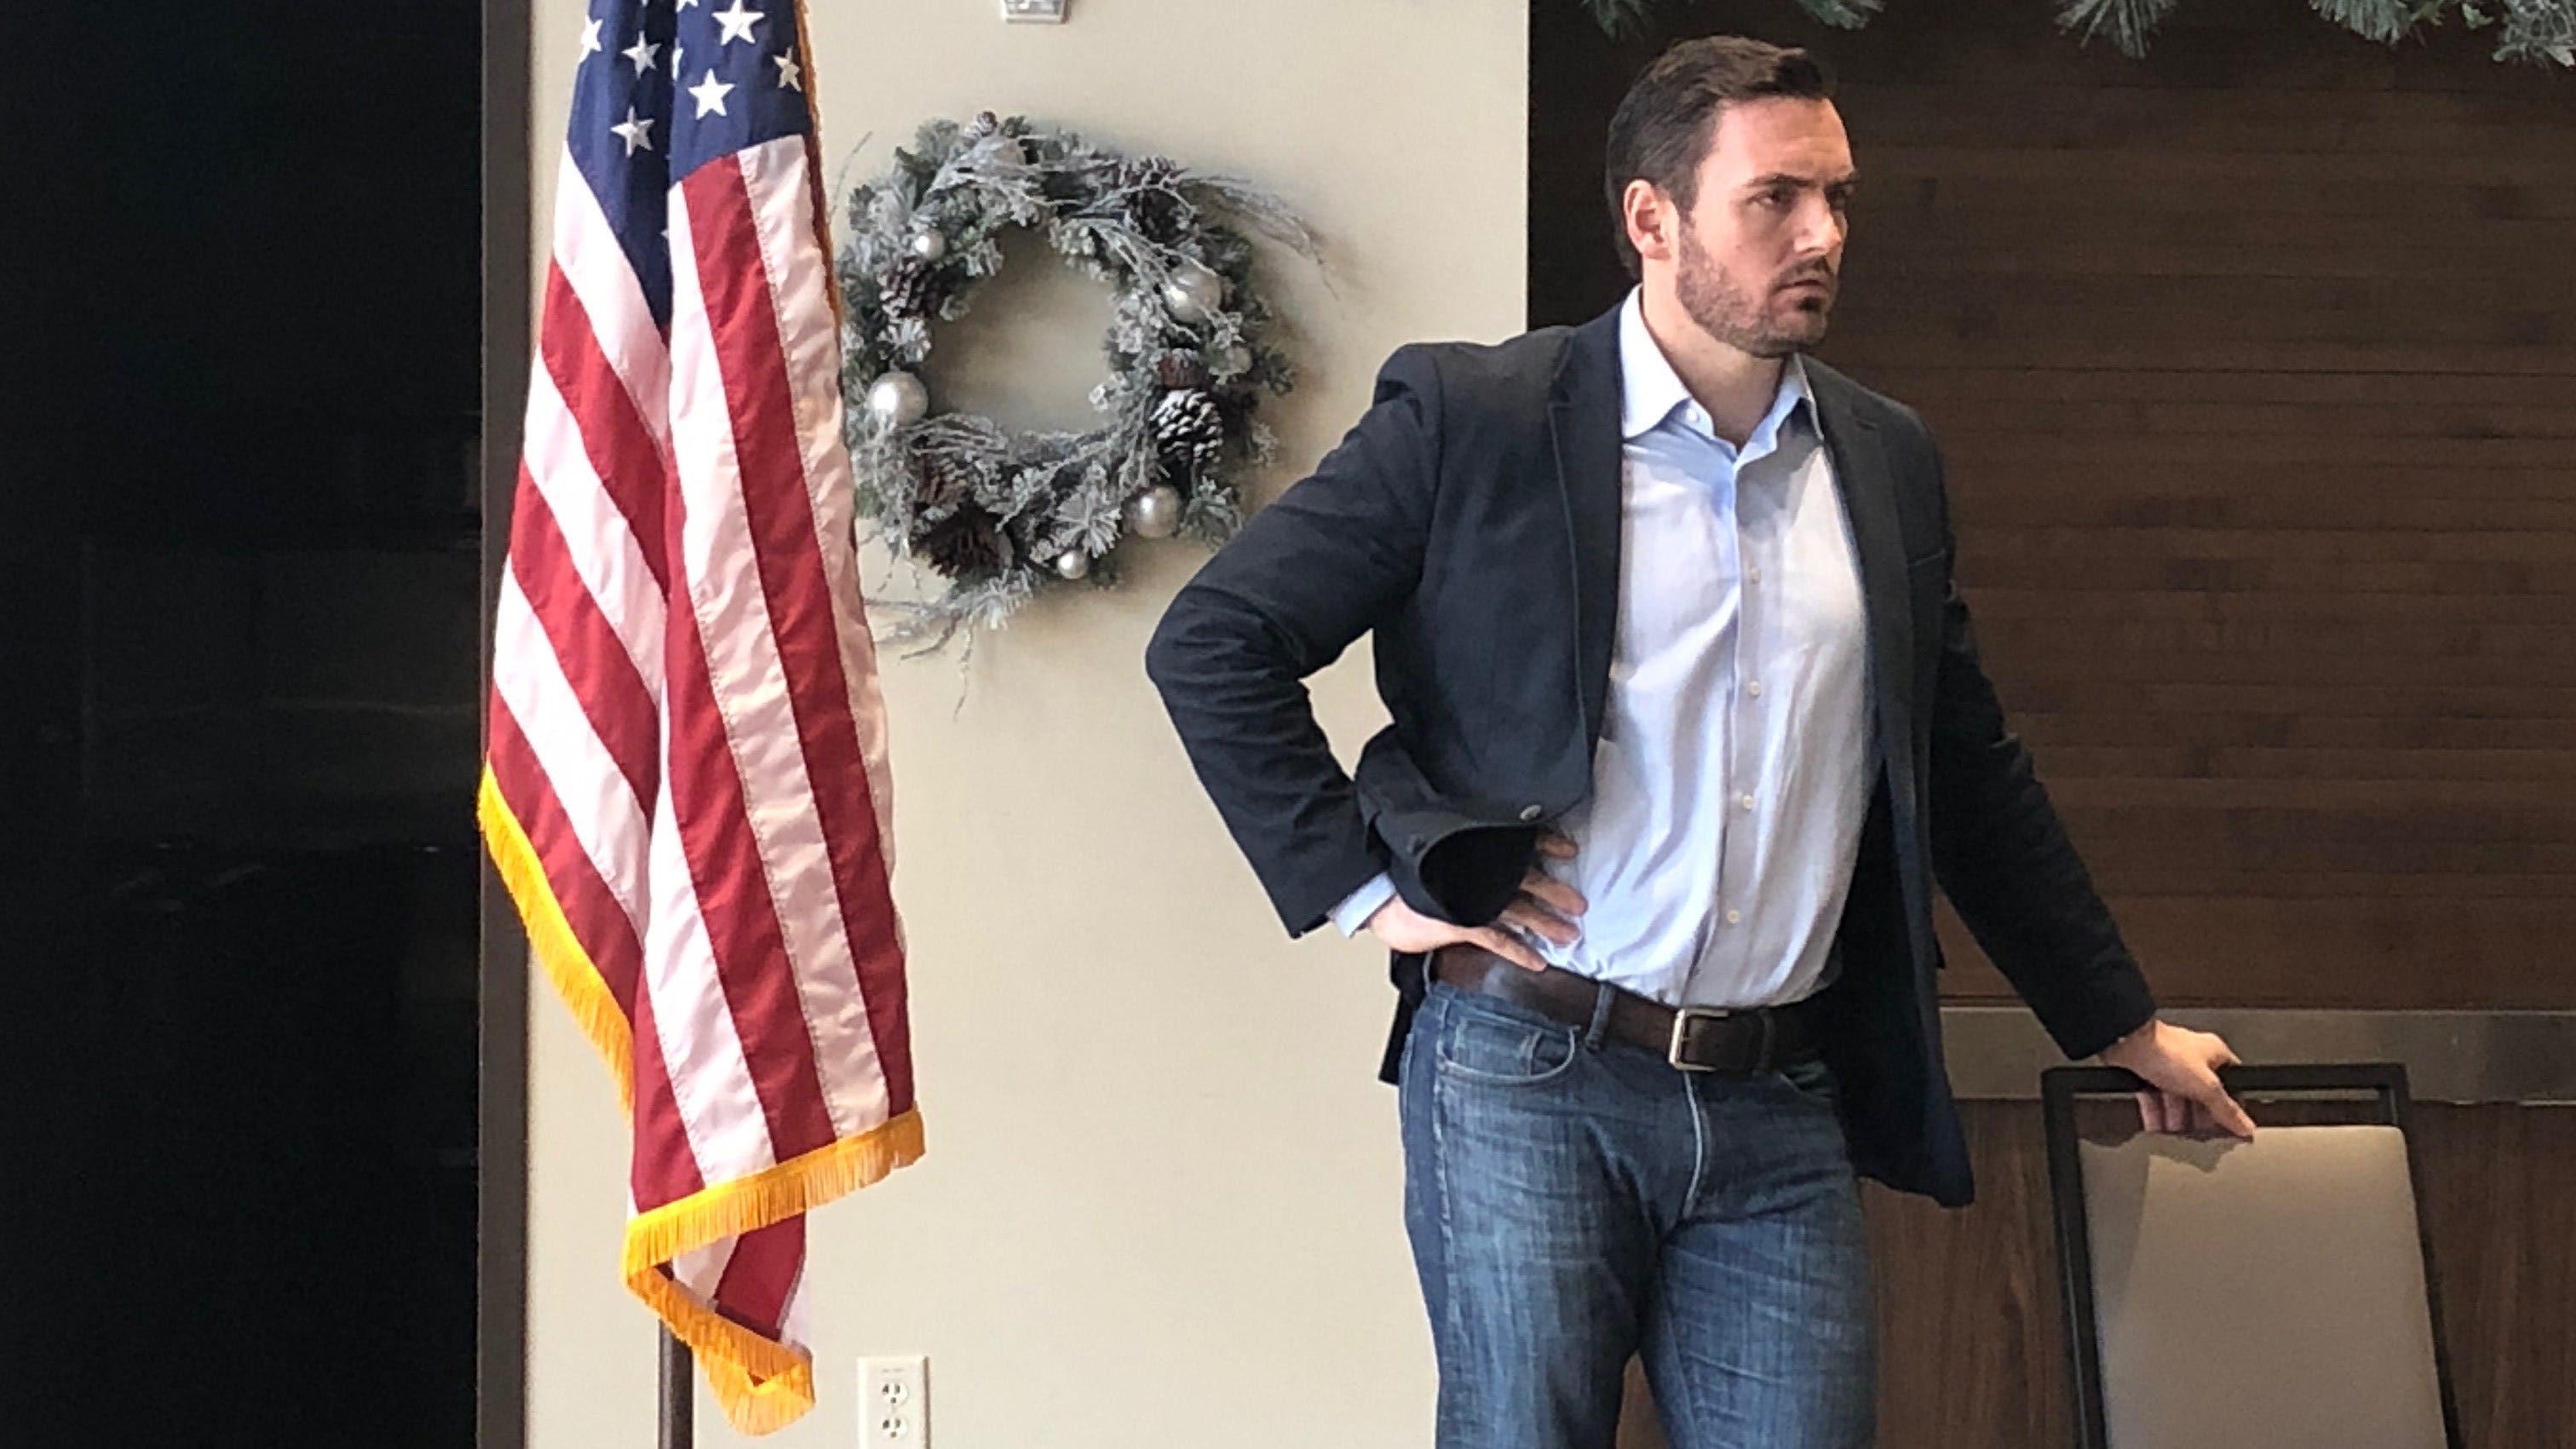 Mike Gallagher President has too much power, Congress needs to step up